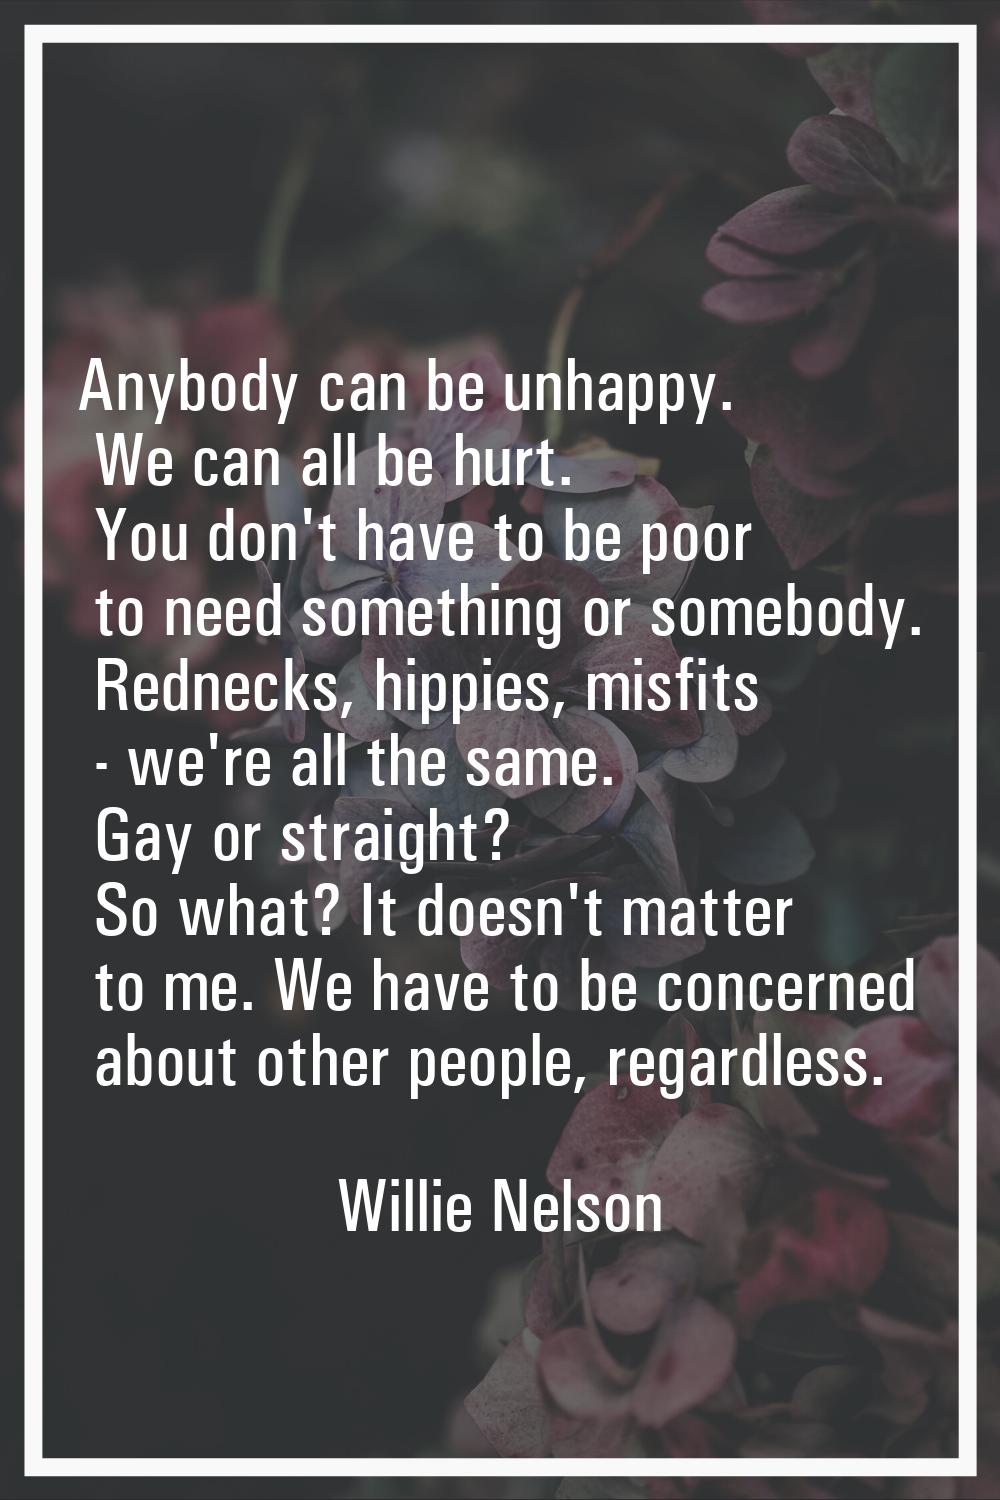 Anybody can be unhappy. We can all be hurt. You don't have to be poor to need something or somebody